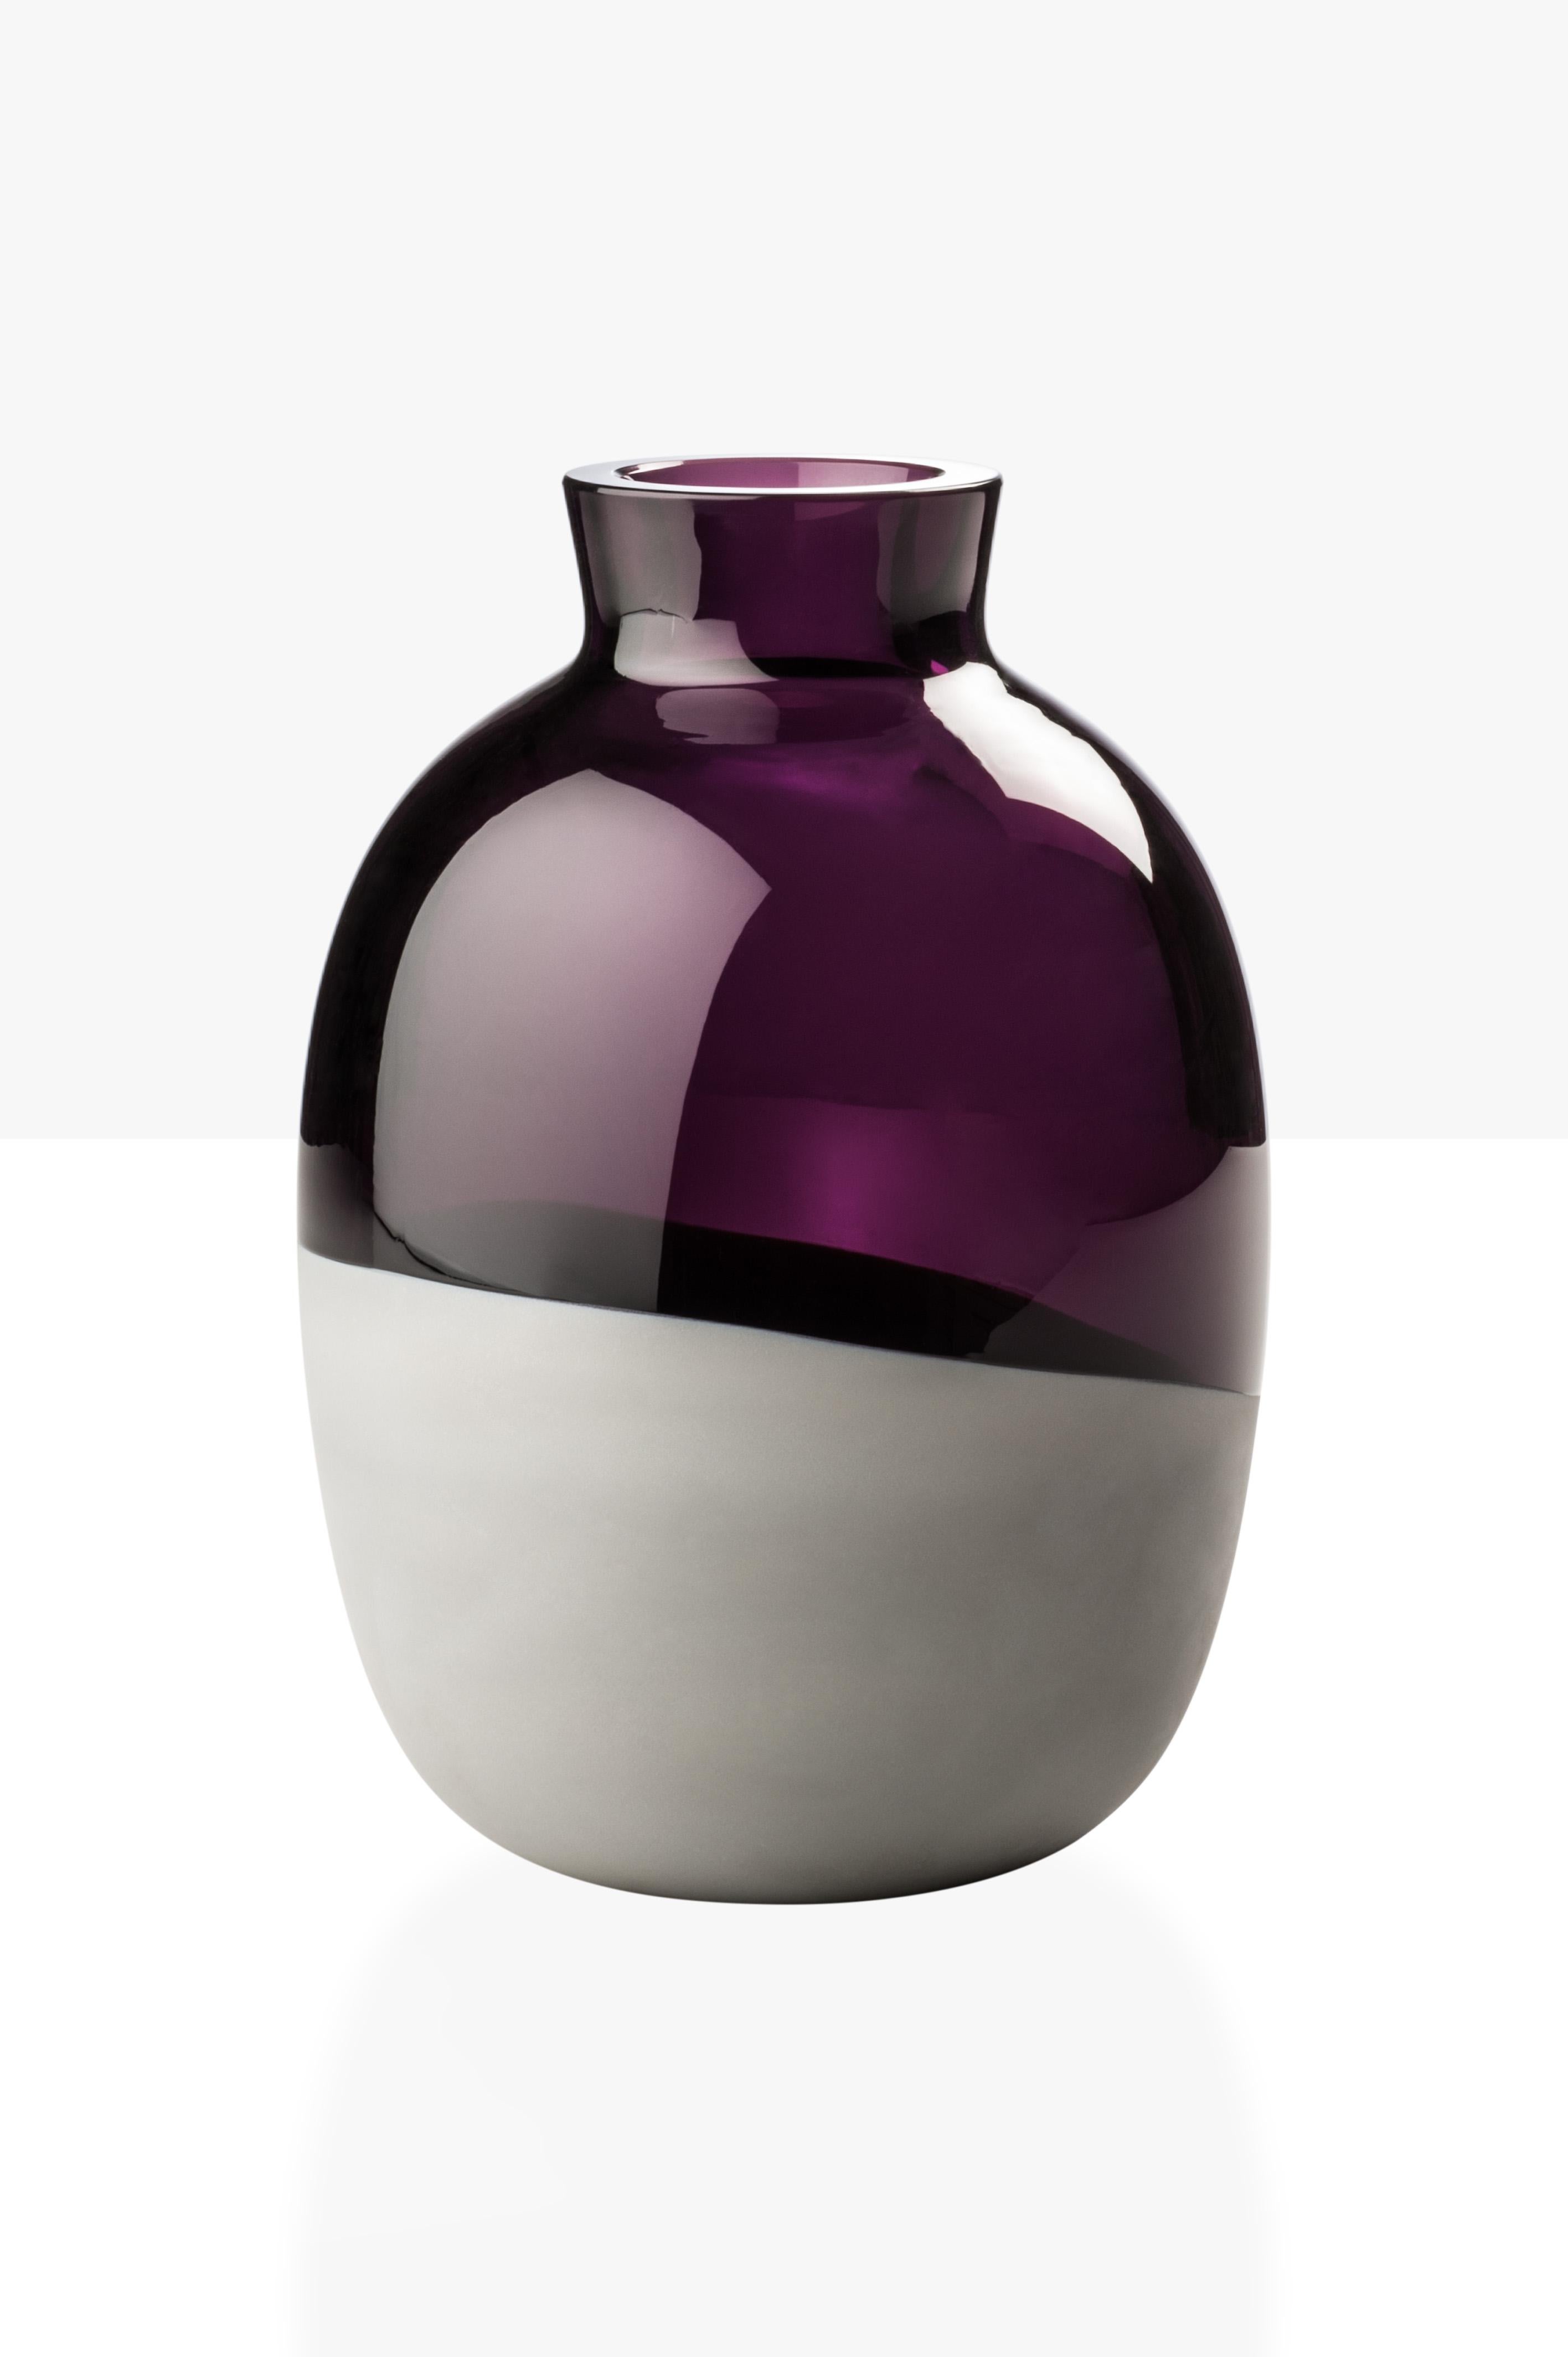 Koori vases, designed by Emmanuel Babled and manufactured by Venini, feature a concrete band melted with the glass. Numbered edition. Indoor use only. Color: Transparent violet/ concrete band satin finish.

Dimensions: Ø 15.6 cm, H 22 cm.